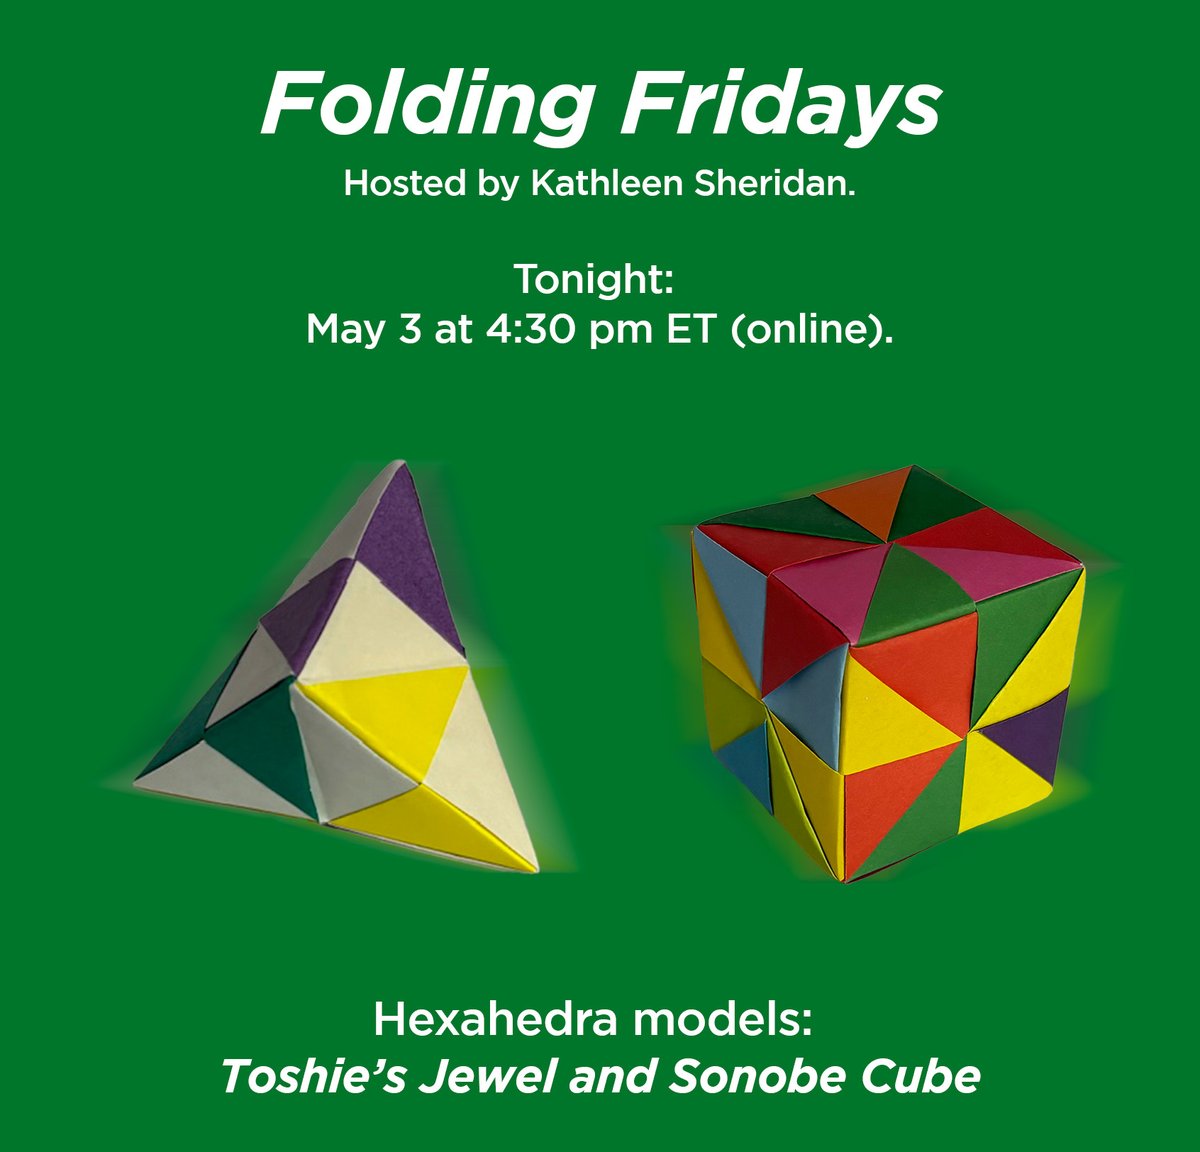 Bring your paper and your best Zoom dance moves to tonight's Folding Fridays session! Learn how to fold the modular bipyramid or cube below with help from your host Kathleen Sheridan. Register at momath.org/folding-fridays.